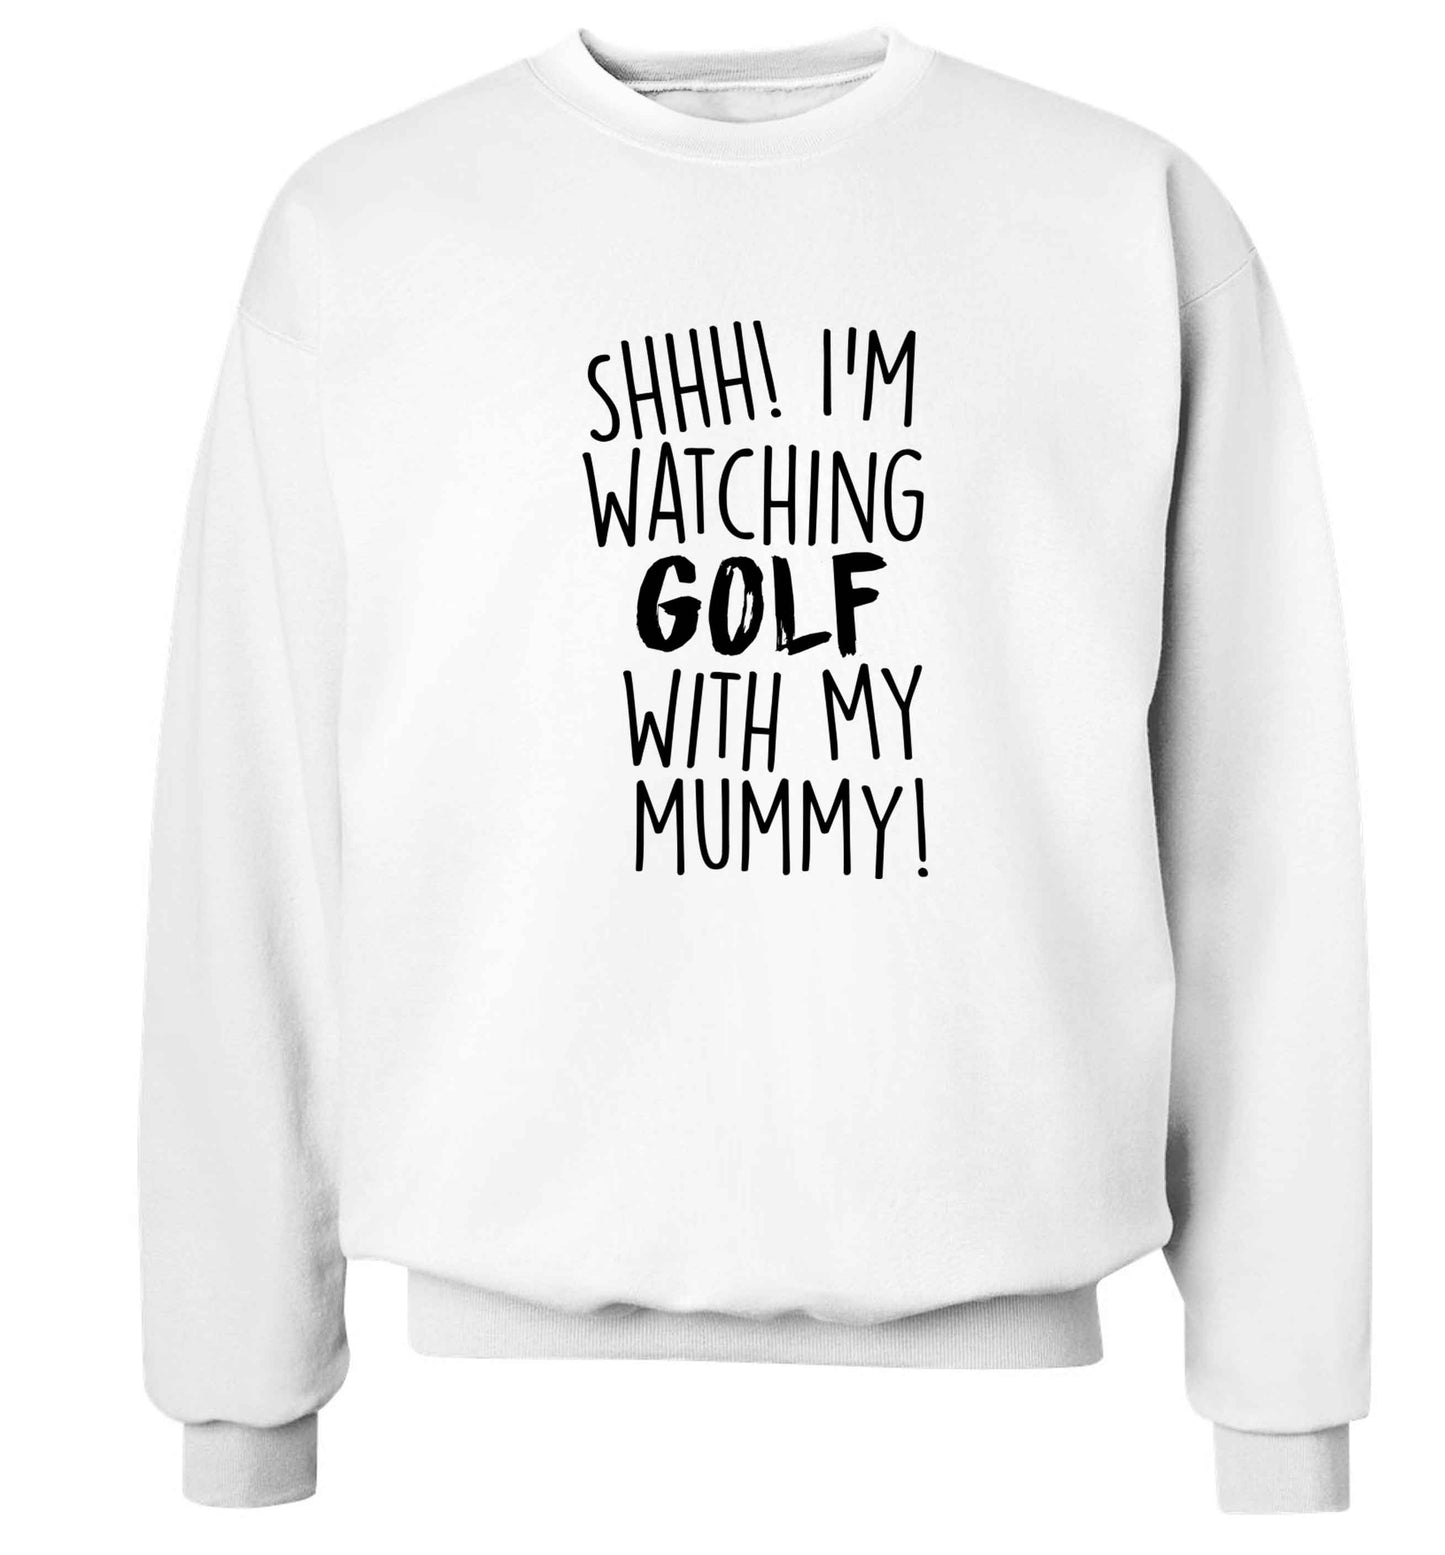 Shh I'm watching golf with my mummy Adult's unisex white Sweater 2XL